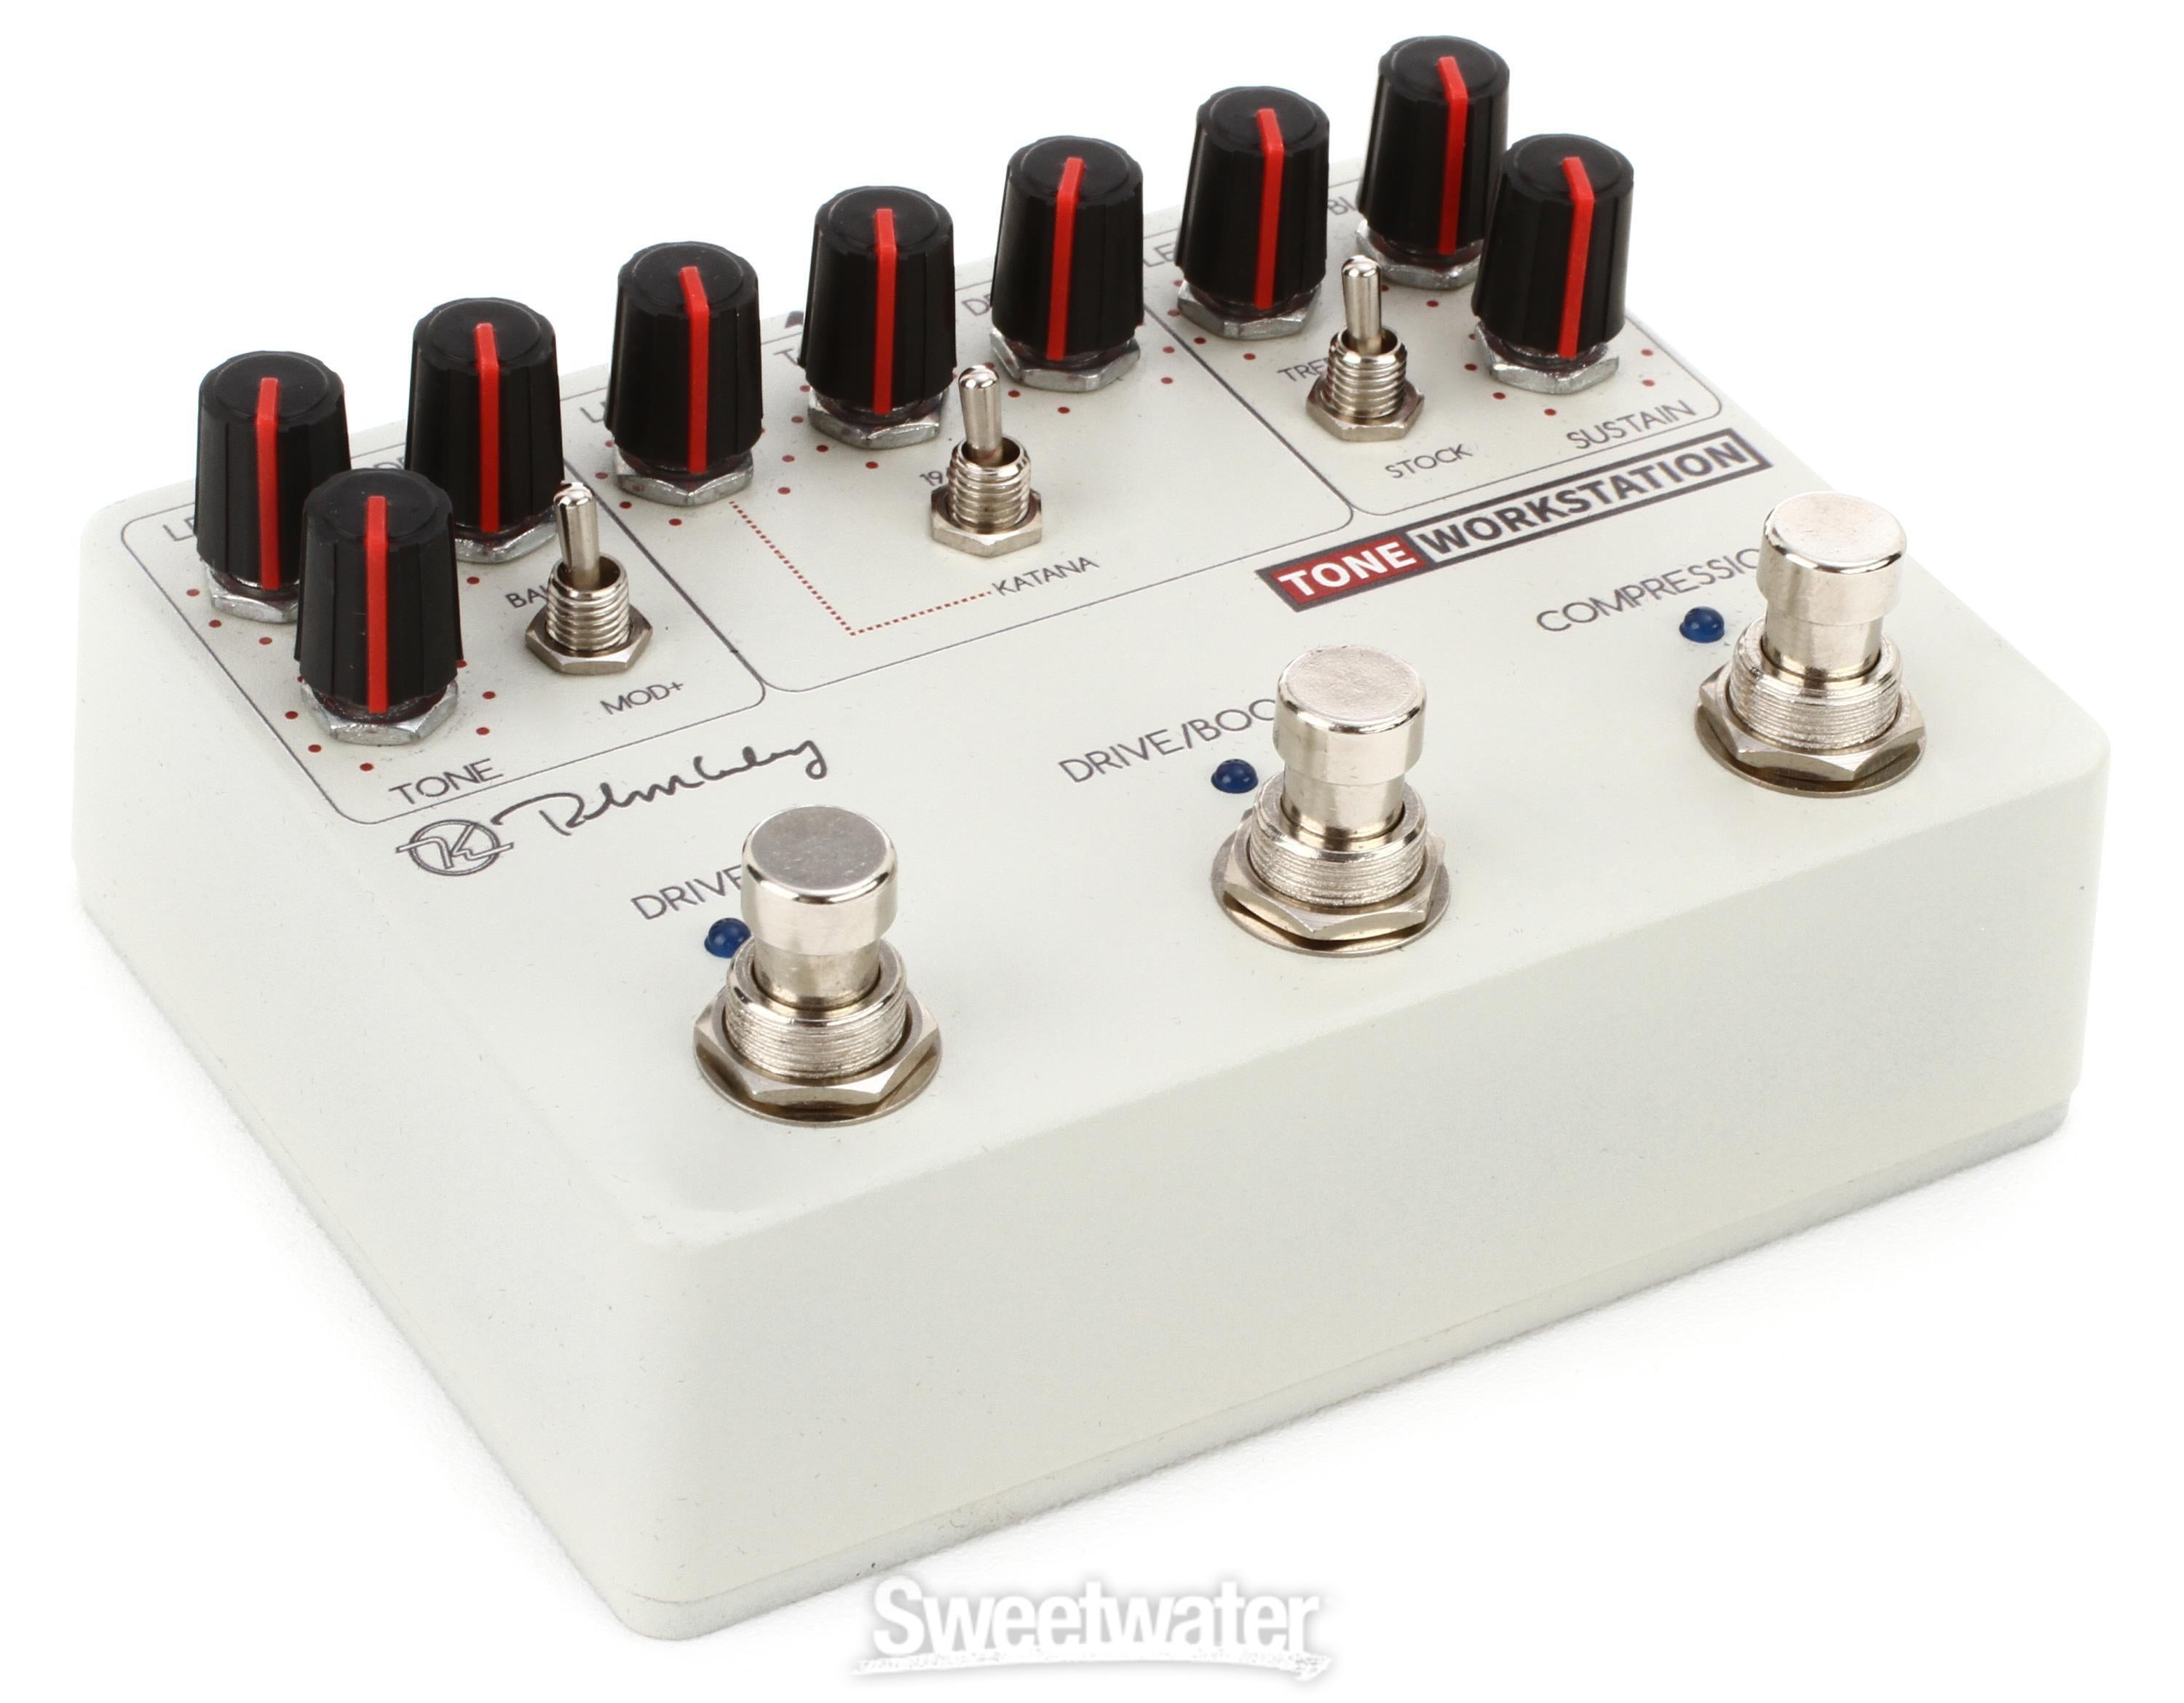 Keeley Tone Workstation Multi-effects Pedal | Sweetwater